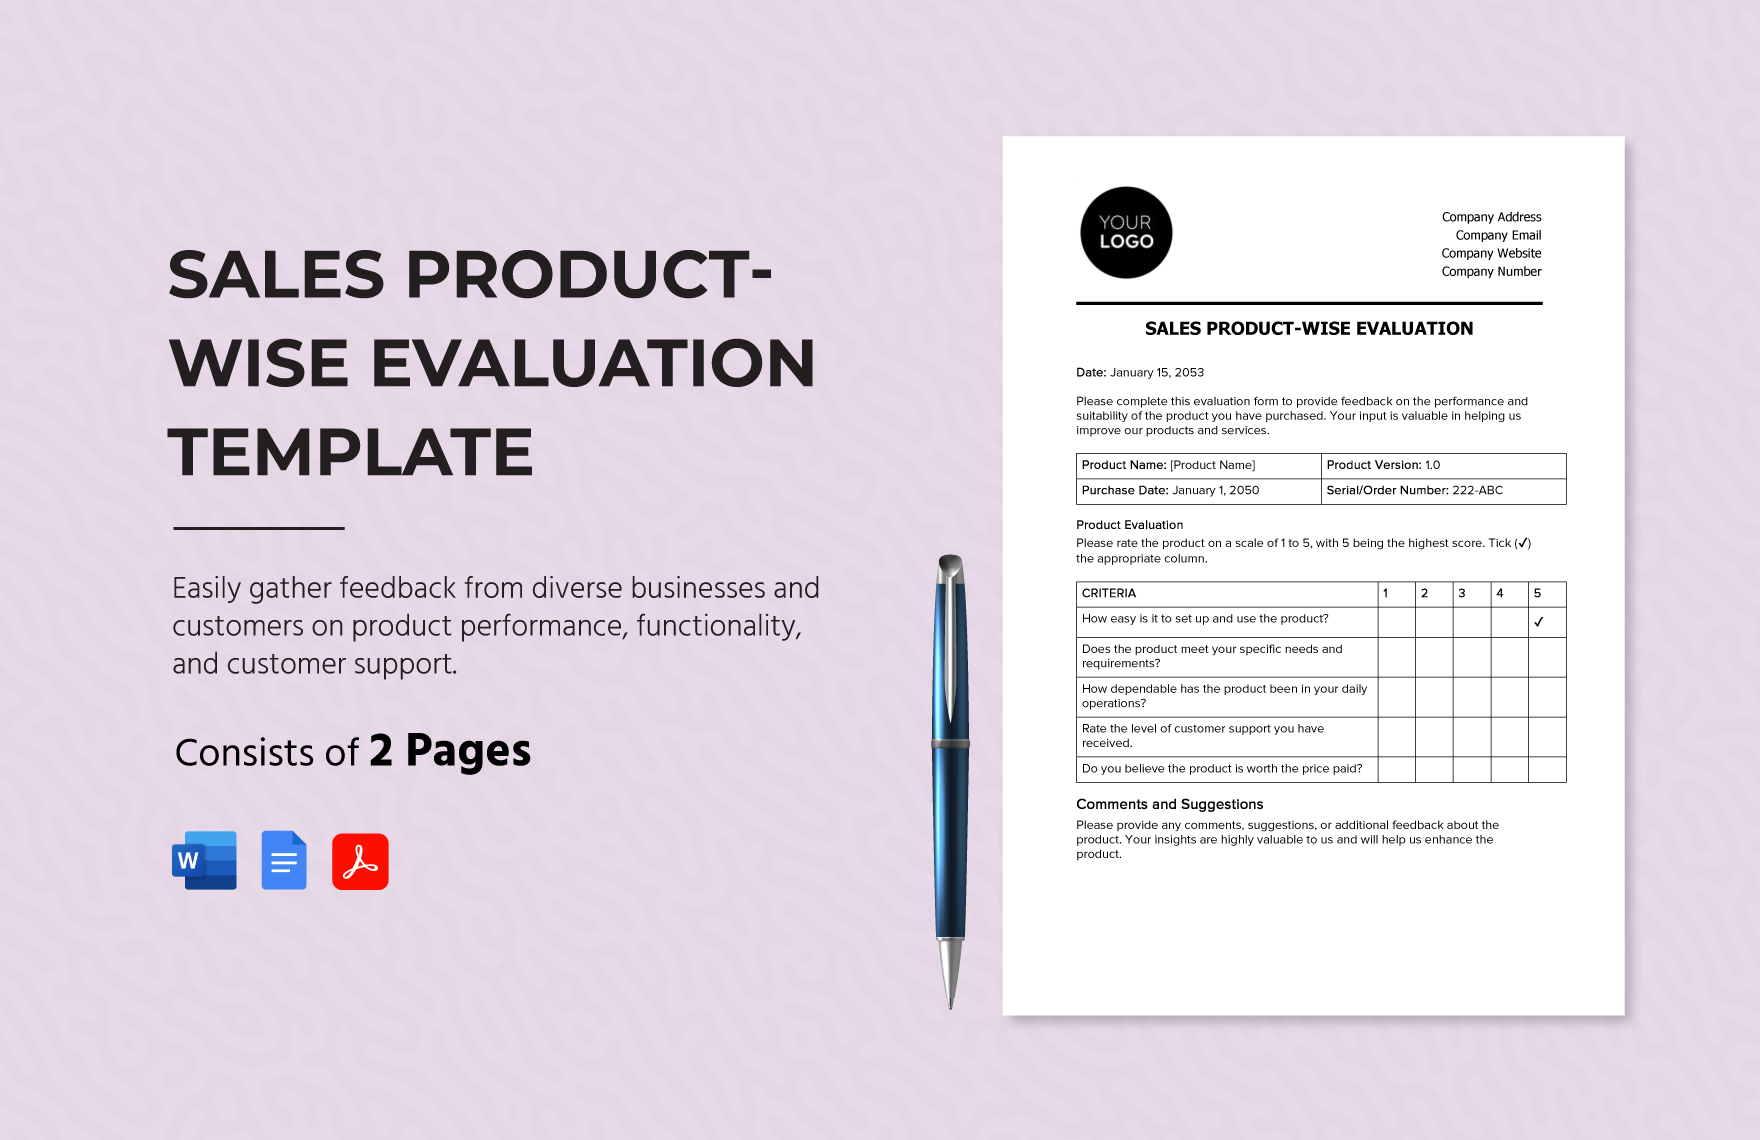 Sales Product-wise Evaluation Template